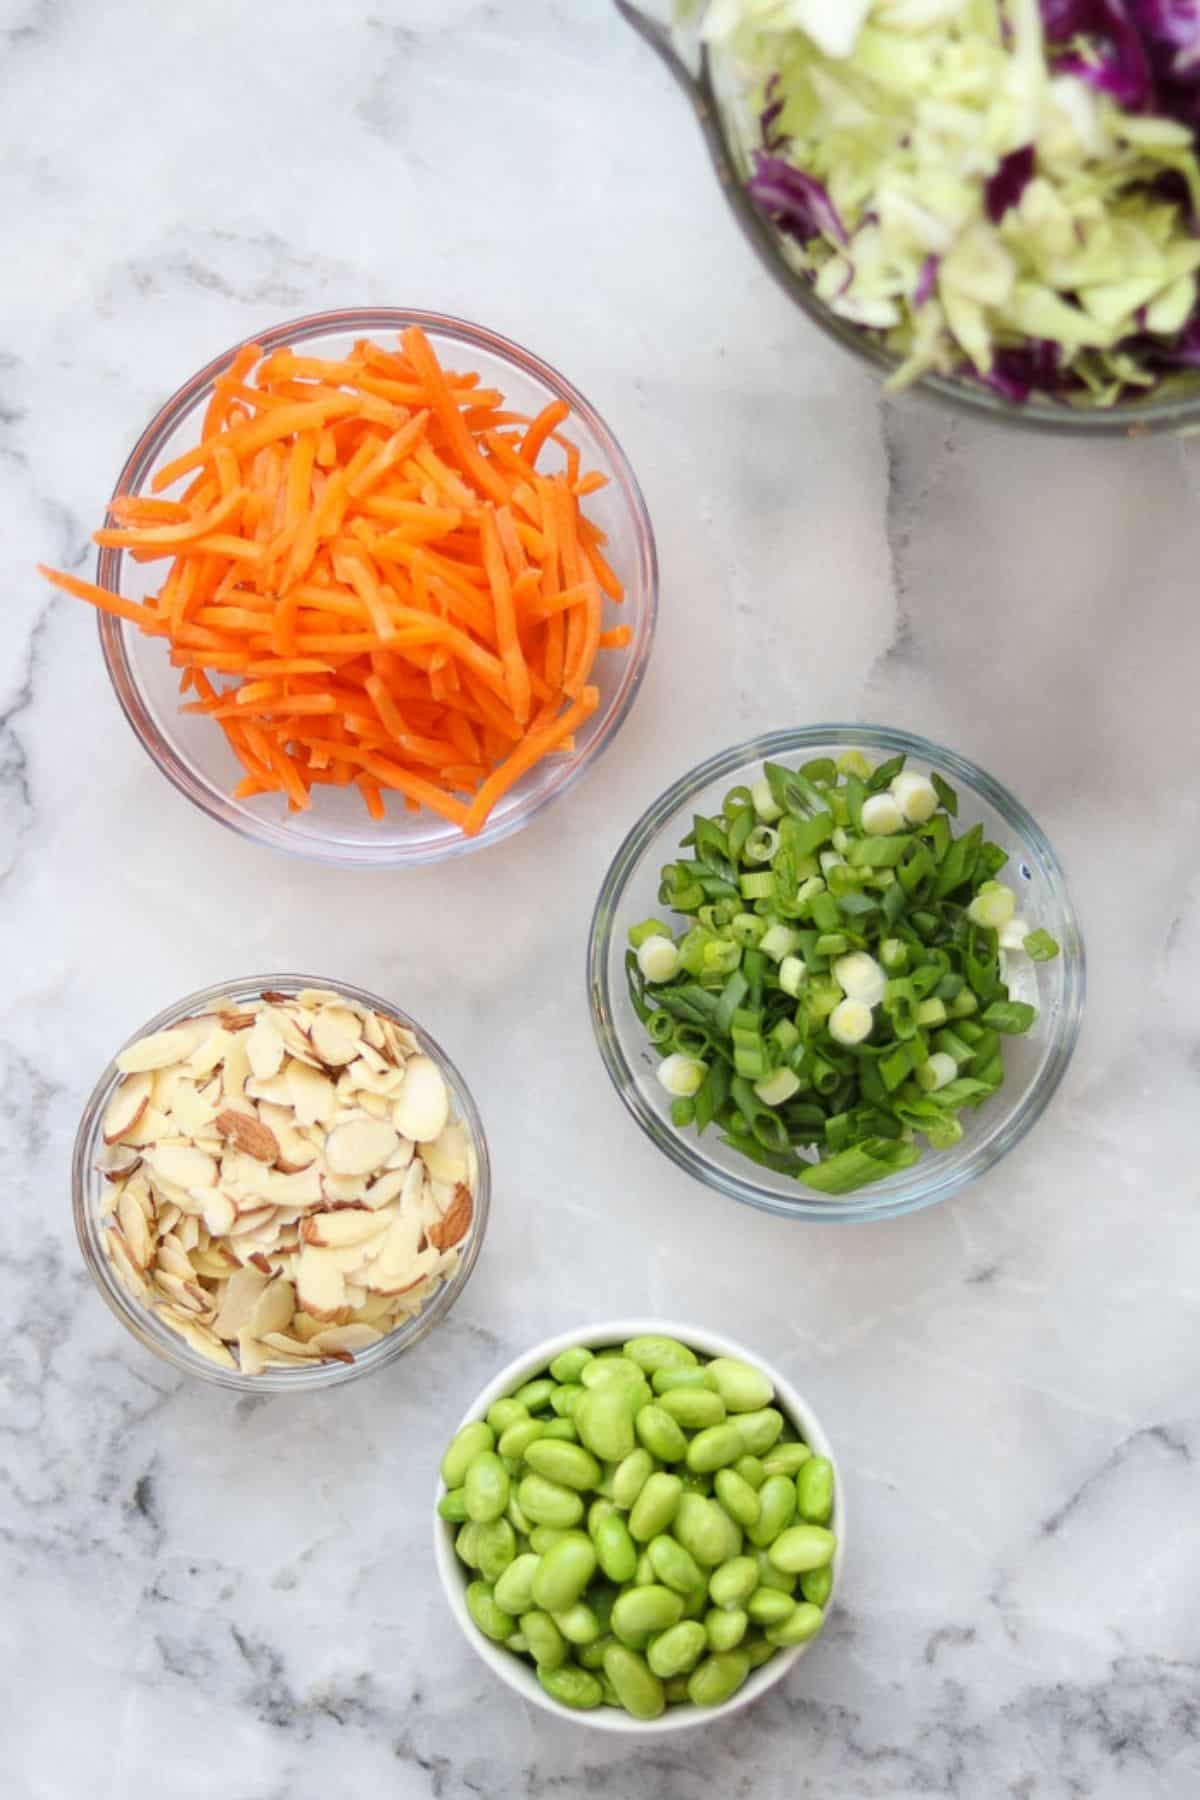 Grated carrots, chopped scallion, slivered almoonds, edamame, and chopped cabbage ingredients.